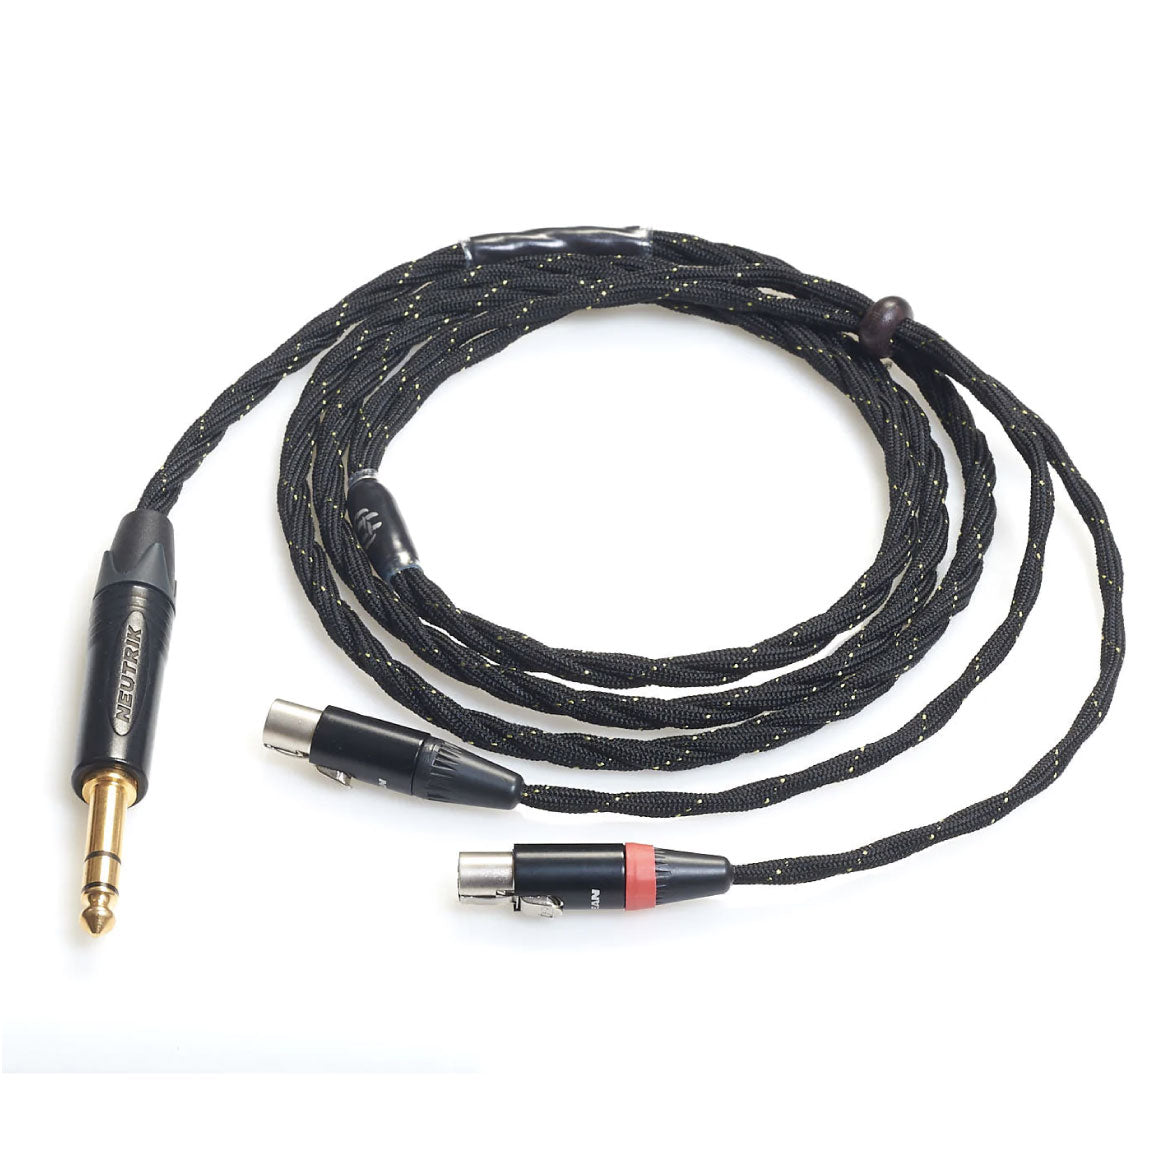 Headgear Audio - Audeze LCD-2, LCD-3, LCD-4, LCD-X, LCD-XC Headphone Replacement Cable